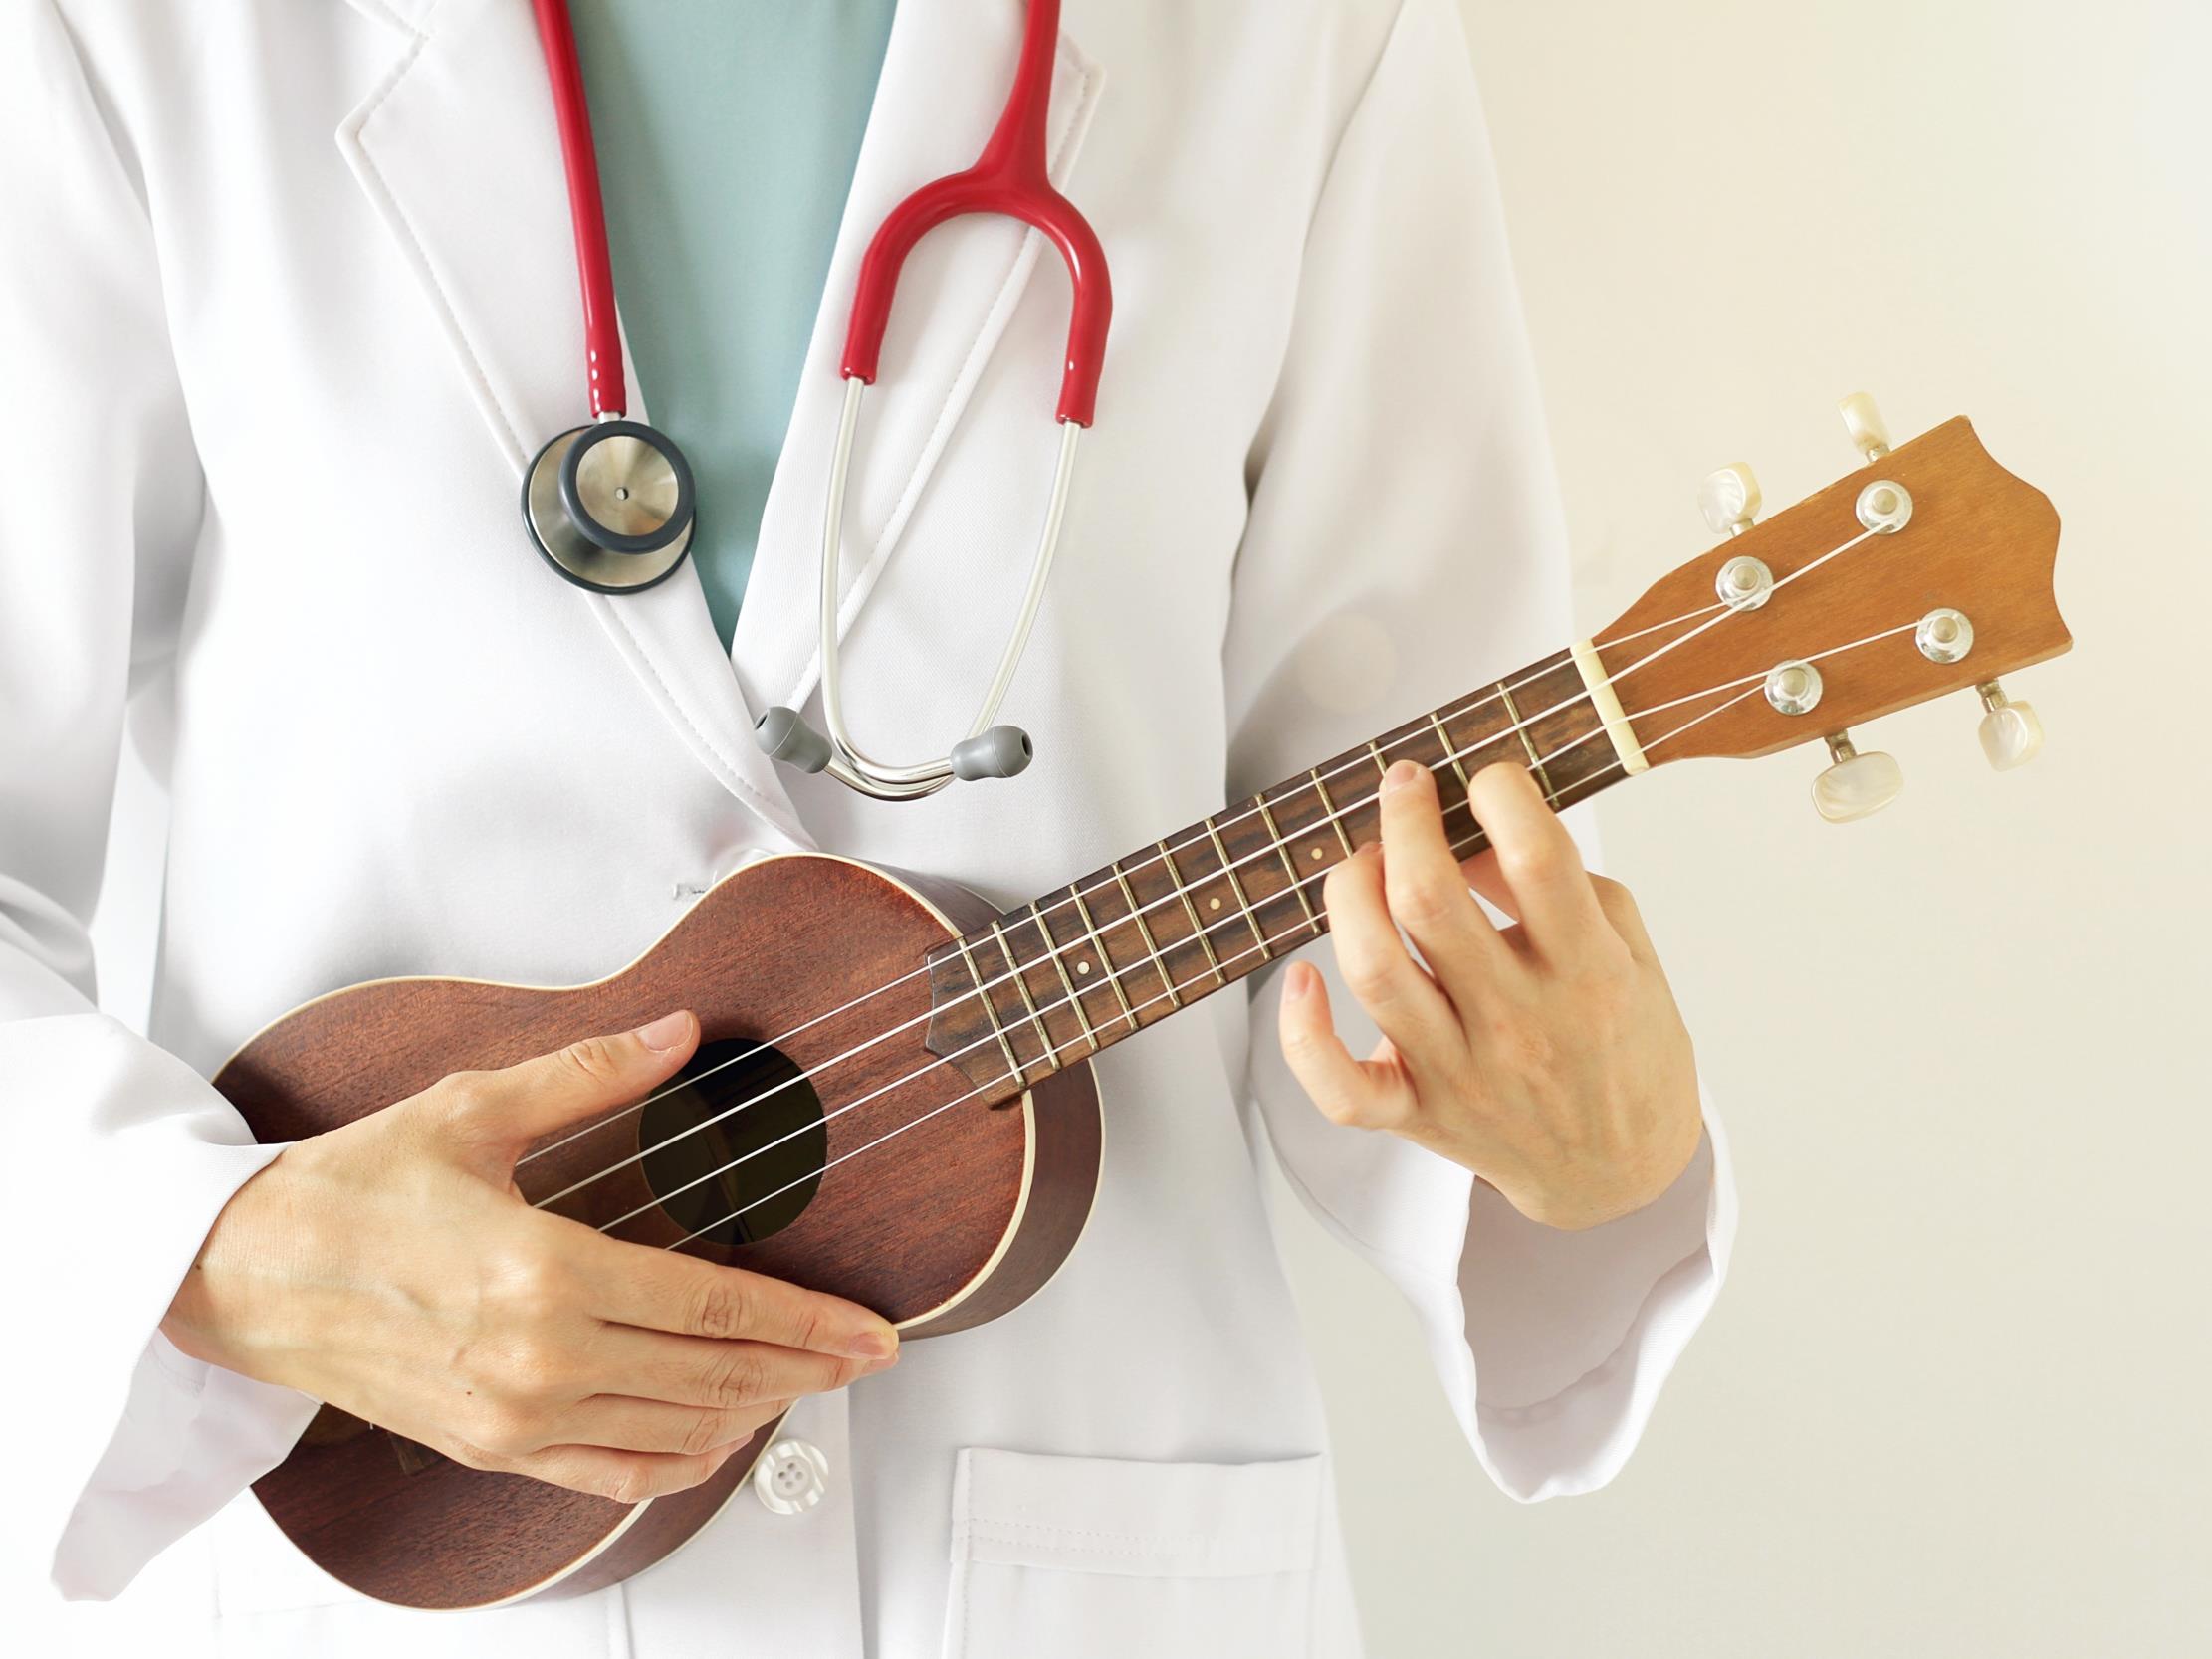 “Music therapy can help from the beginning of life to the end,” says the specialist